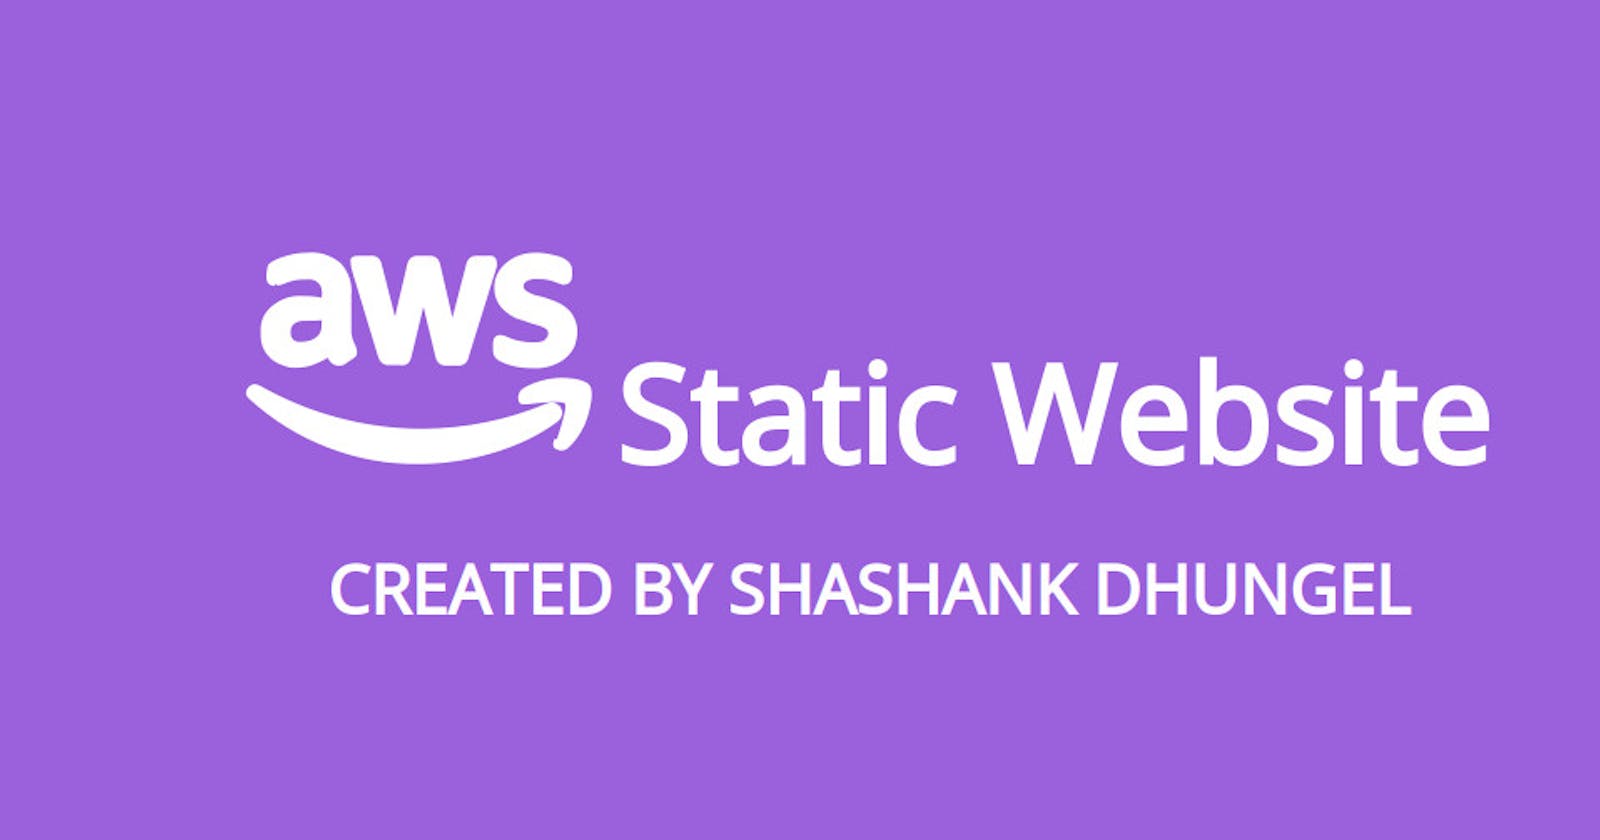 How to create a publicly accessible static website and host it on Amazon S3